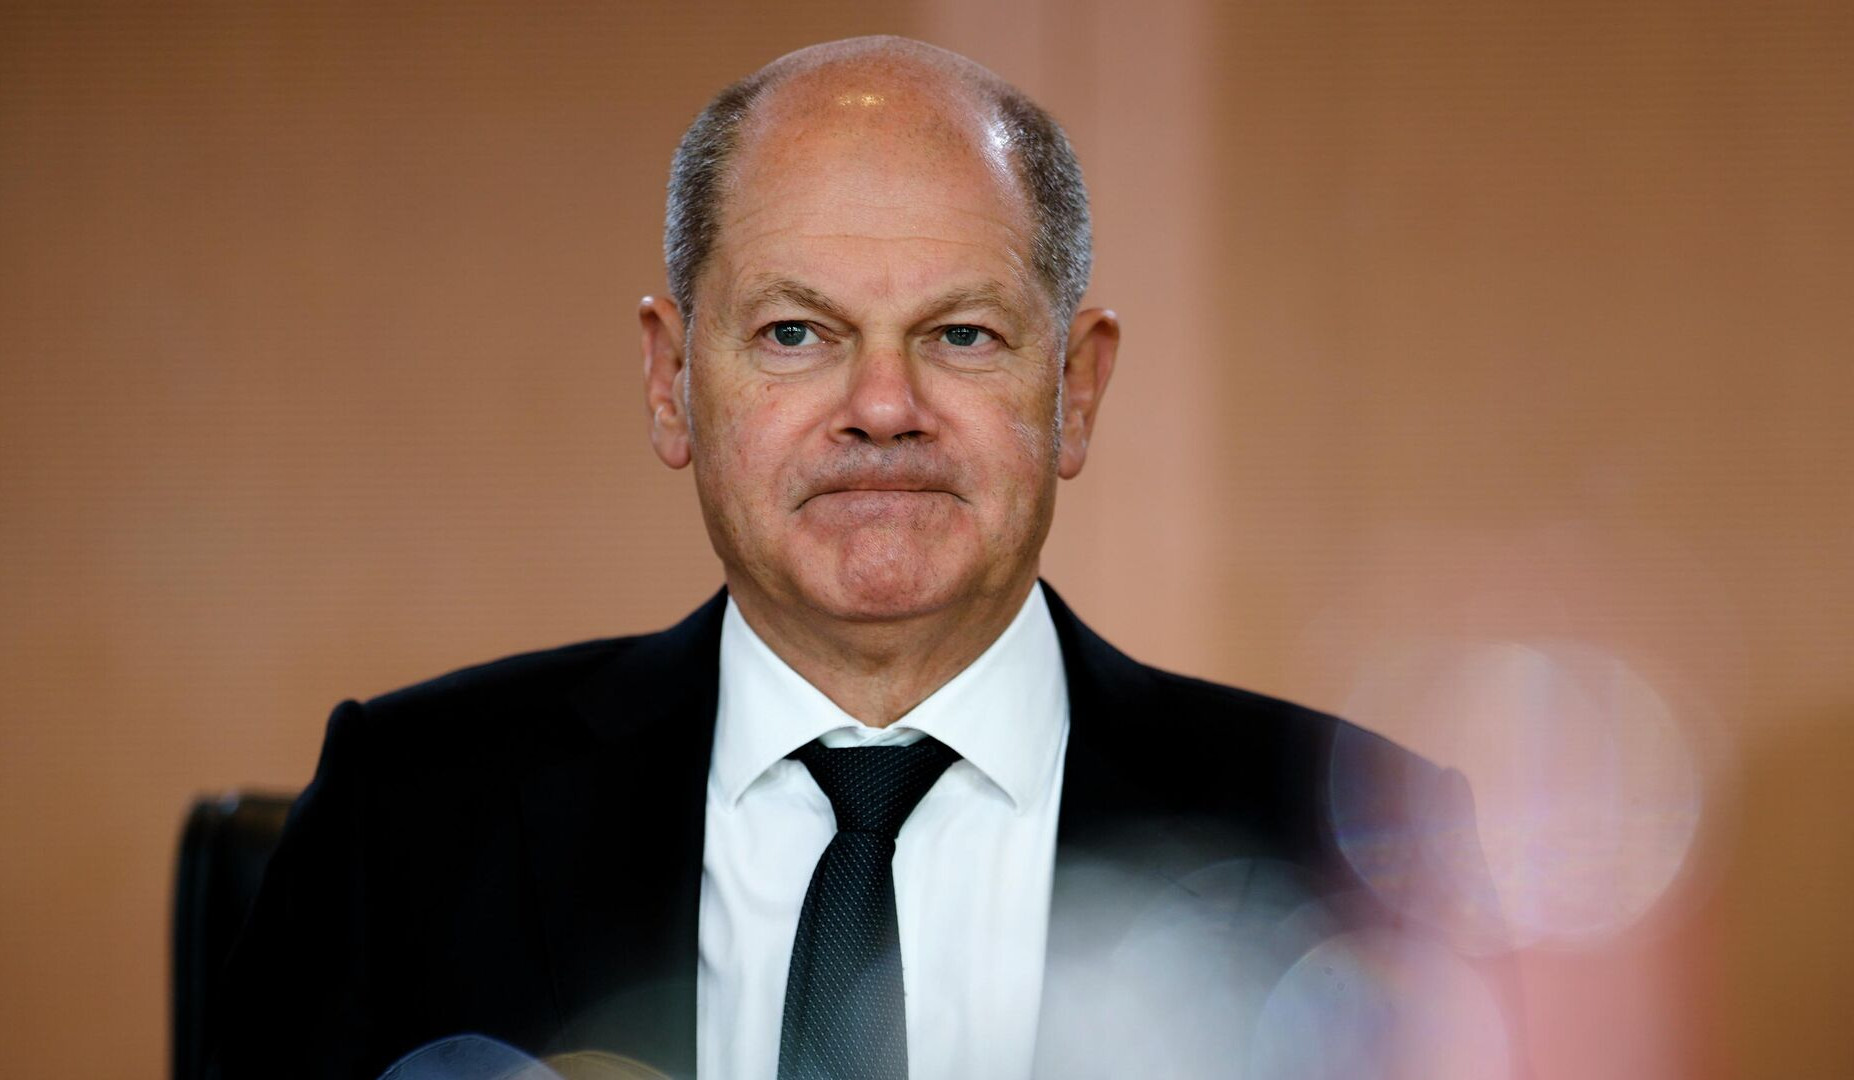 Scholz urged to resume cooperation with Russia after end of conflict in Ukraine